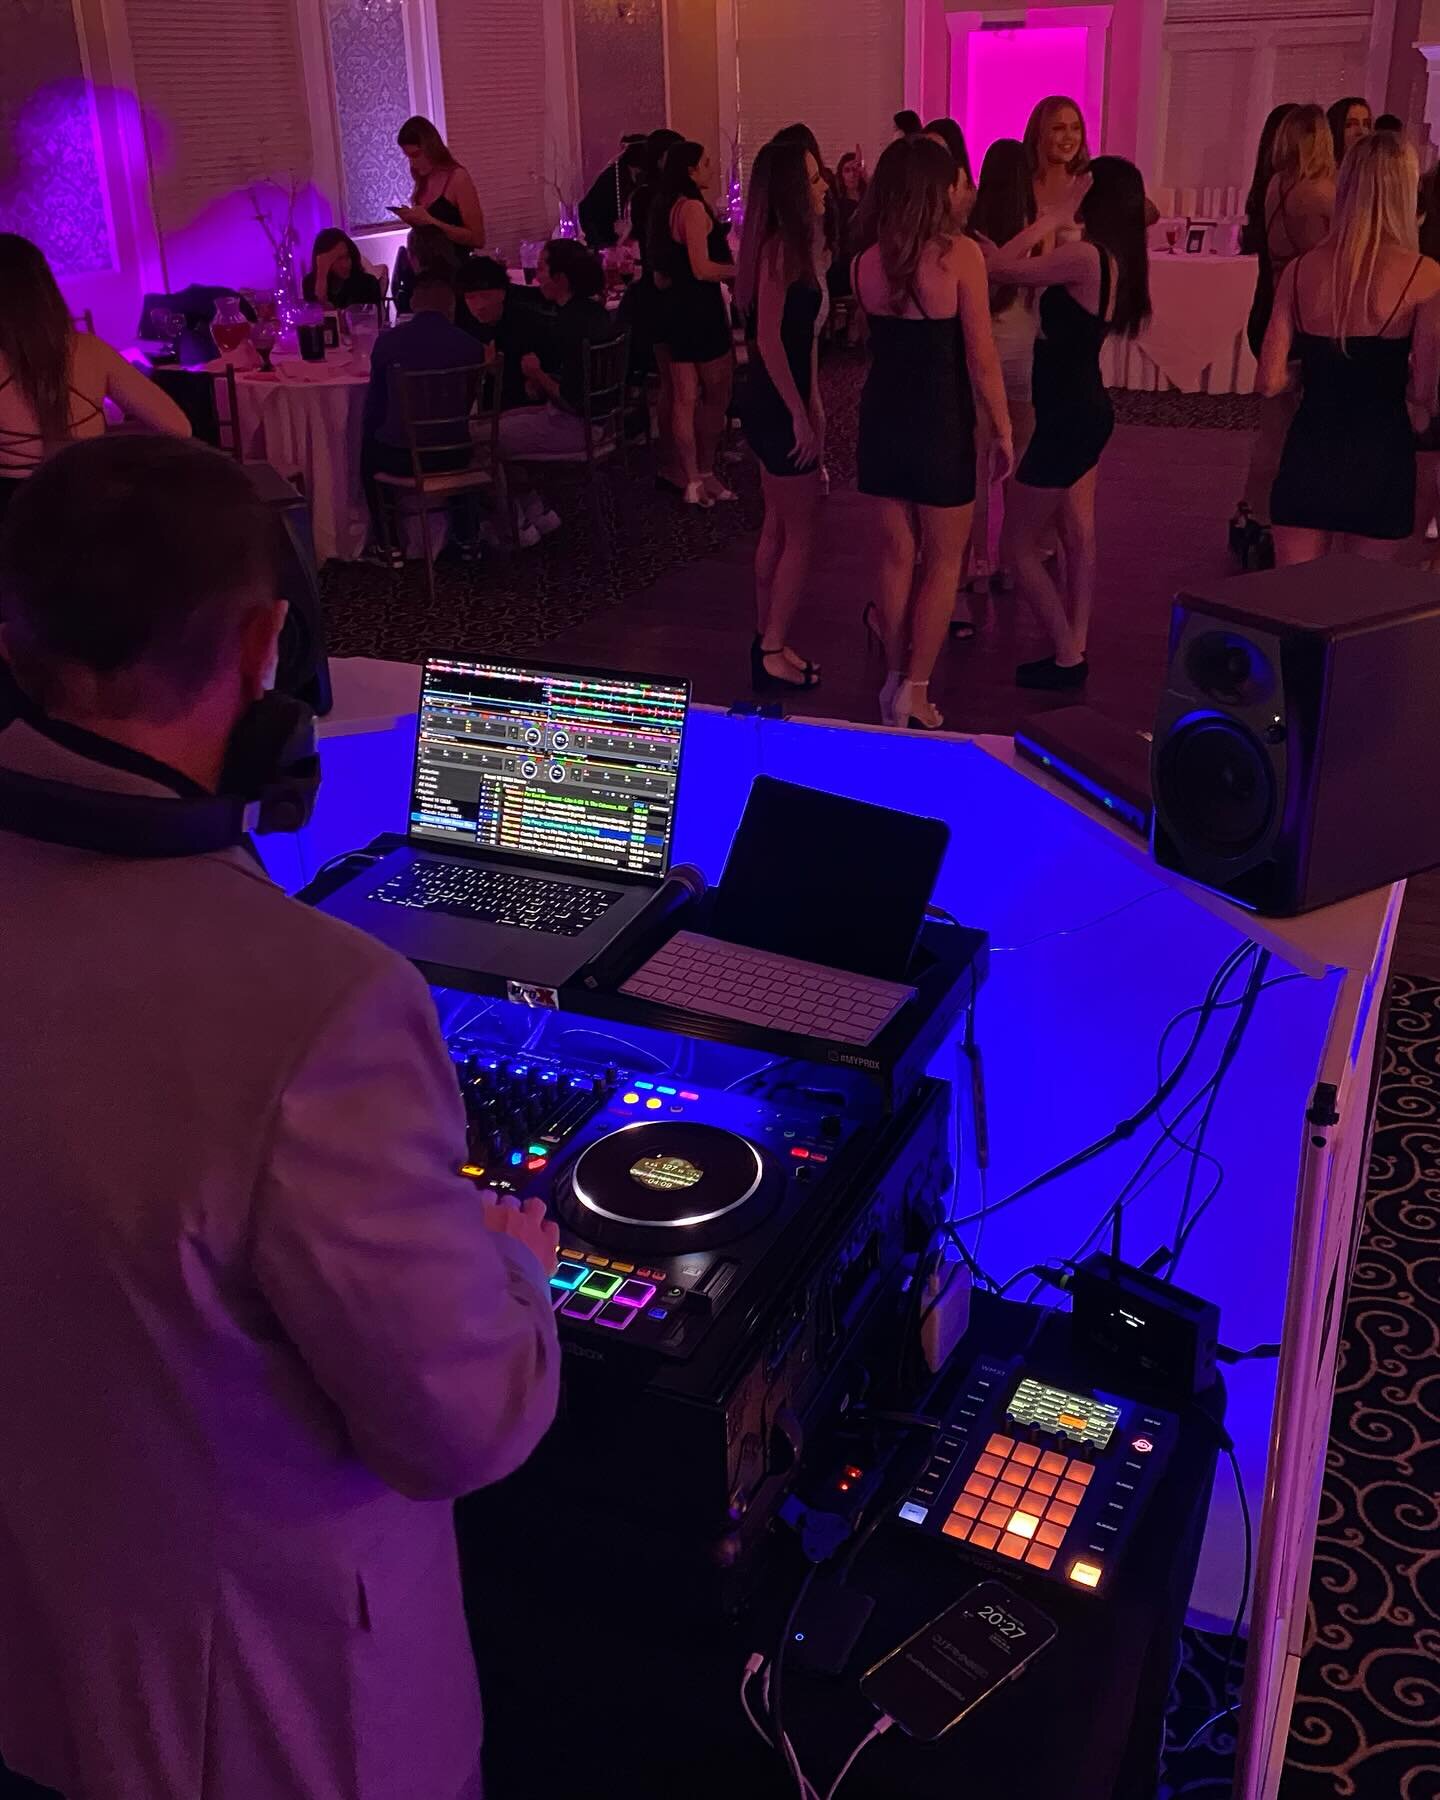 Scenes from a really fun Sweet 16 Celebration this weekend !

The Father/ Daughter dance featured a choreographed dance routine with a custom made mashup mix built for the client by @djfrankec 

Equipment used that evening:

Controller: Pioneer FLX10